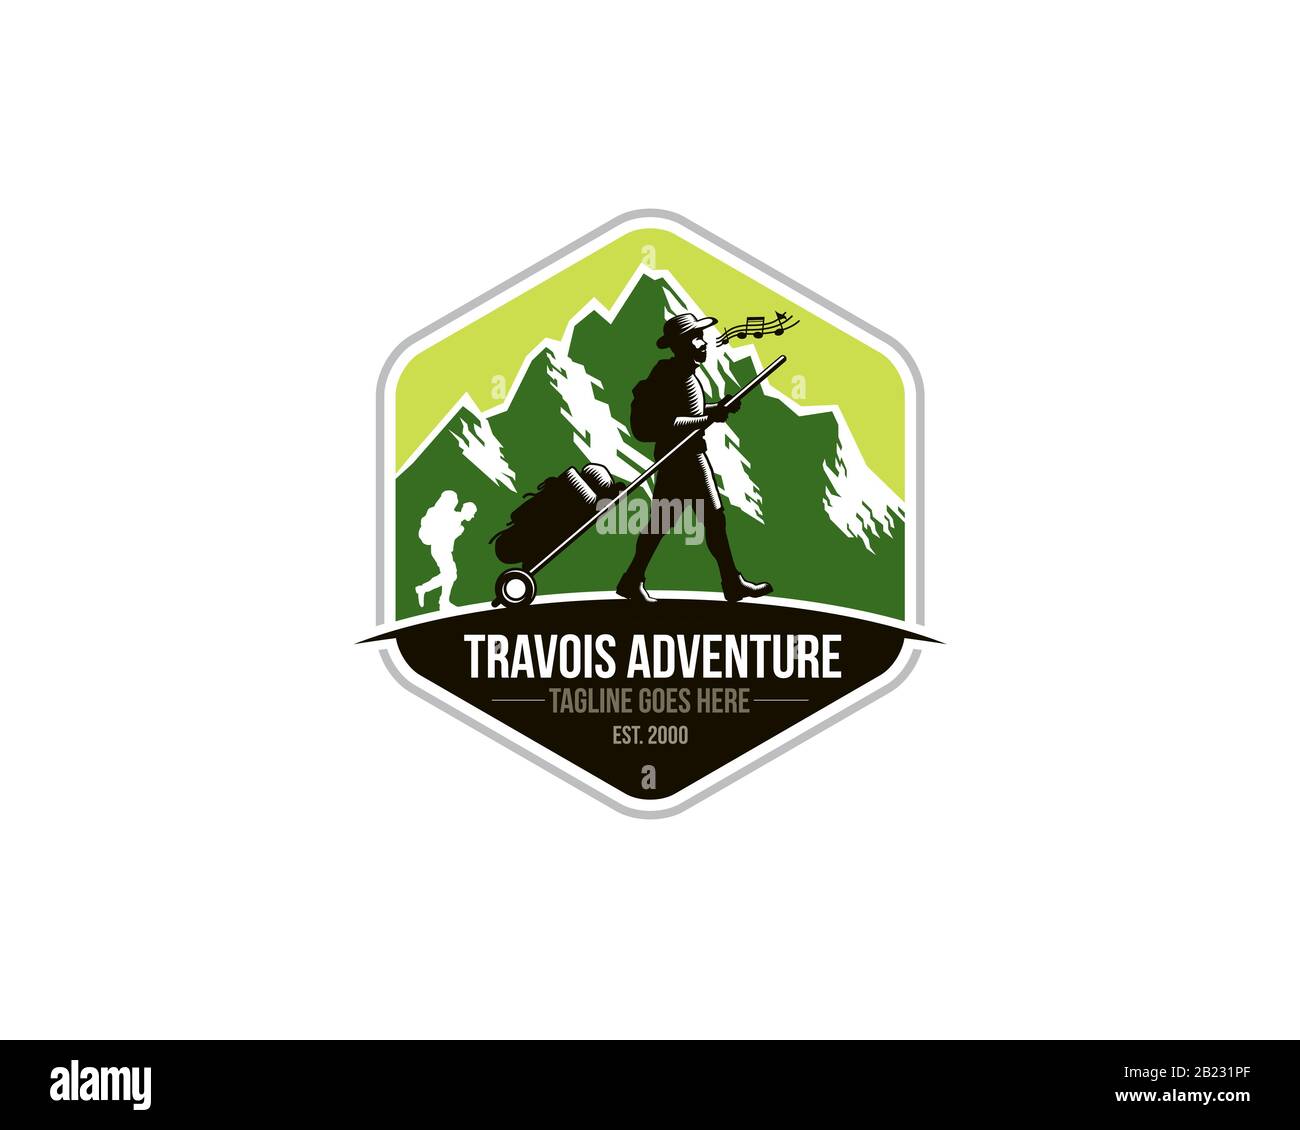 emblem logo of sherpa trekker pulling travois walking on the ground in front of mountains Stock Vector